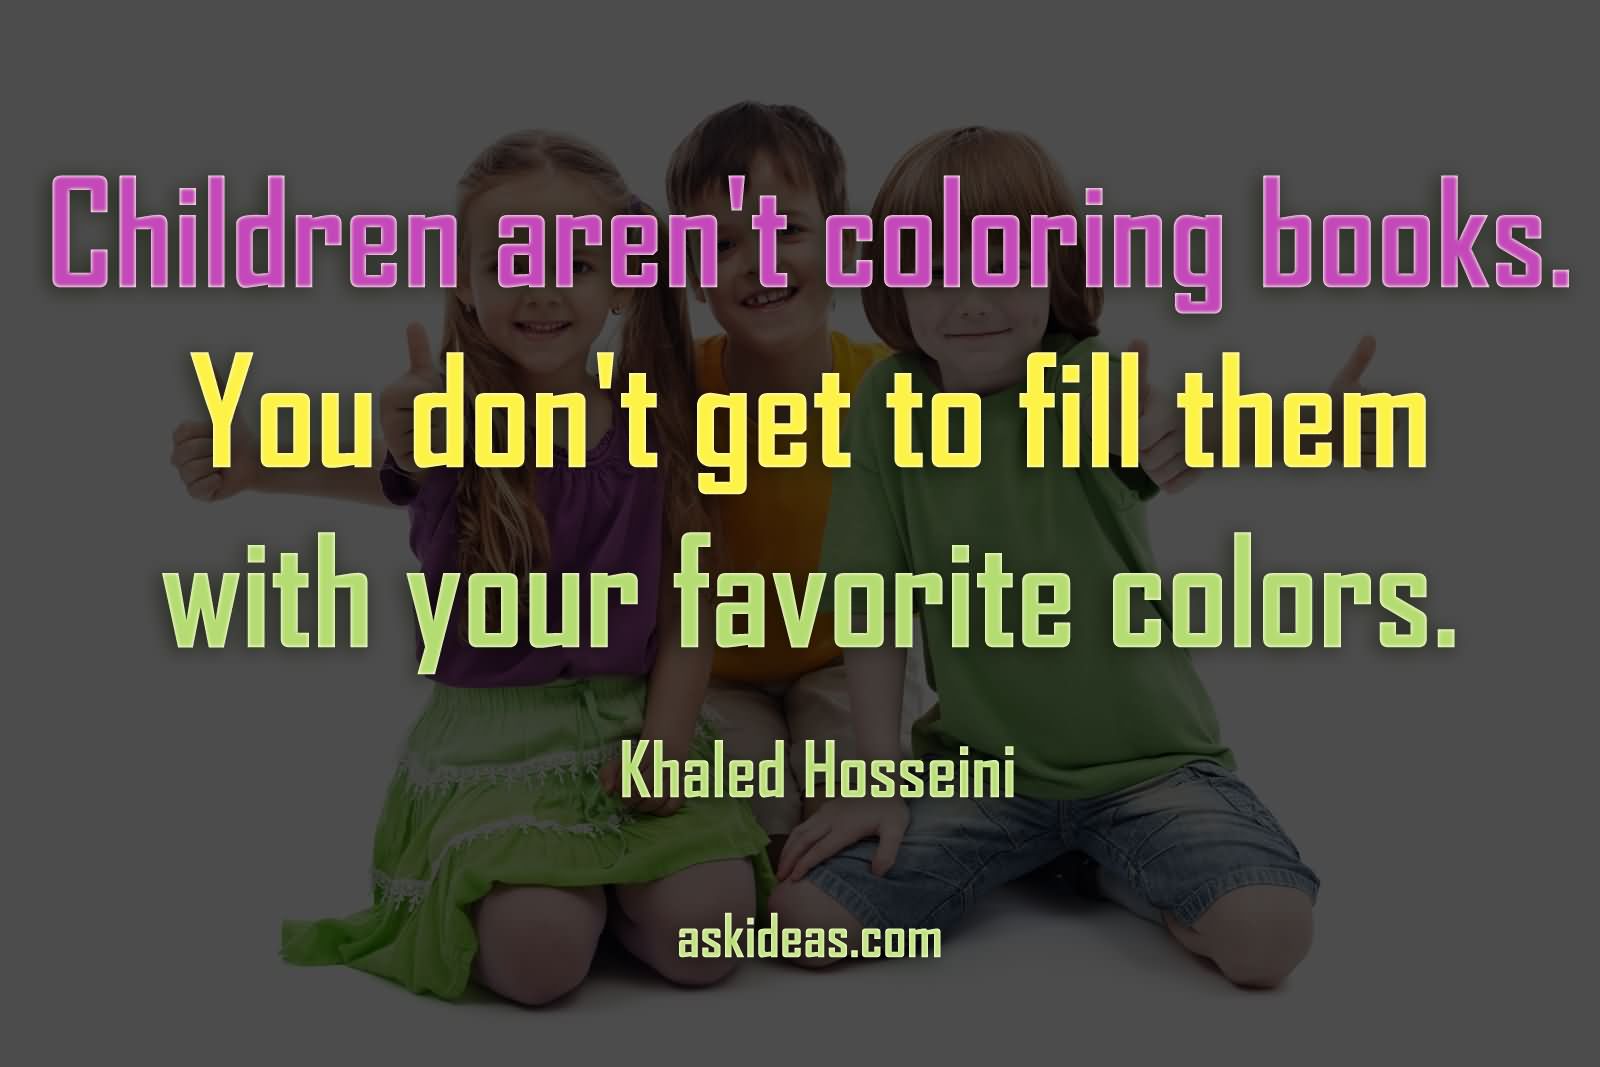 Children aren’t coloring books. You don’t get to fill them with your favorite colors.